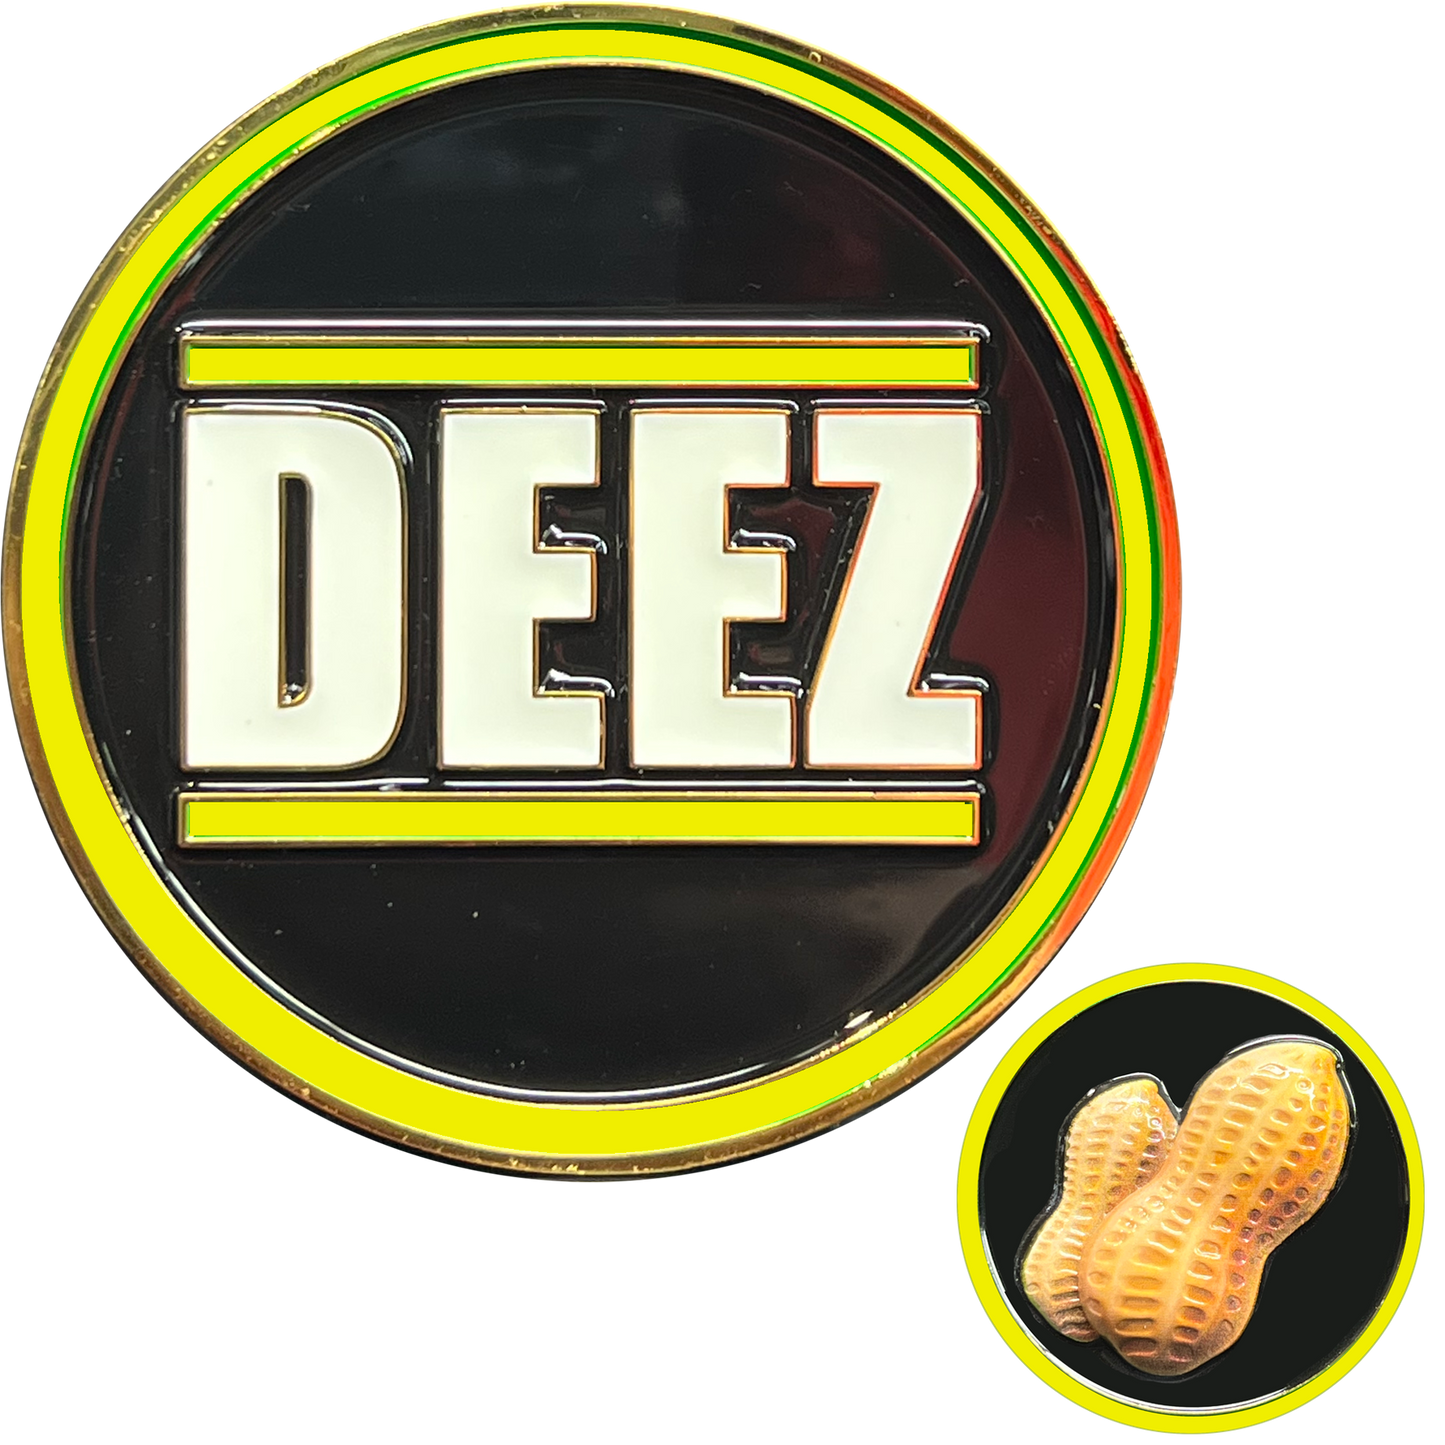 GL2-003 Deez Nuts challenge coin with 3D nuts Dispatcher Funny Gag Gift Thin Gold Line yellow